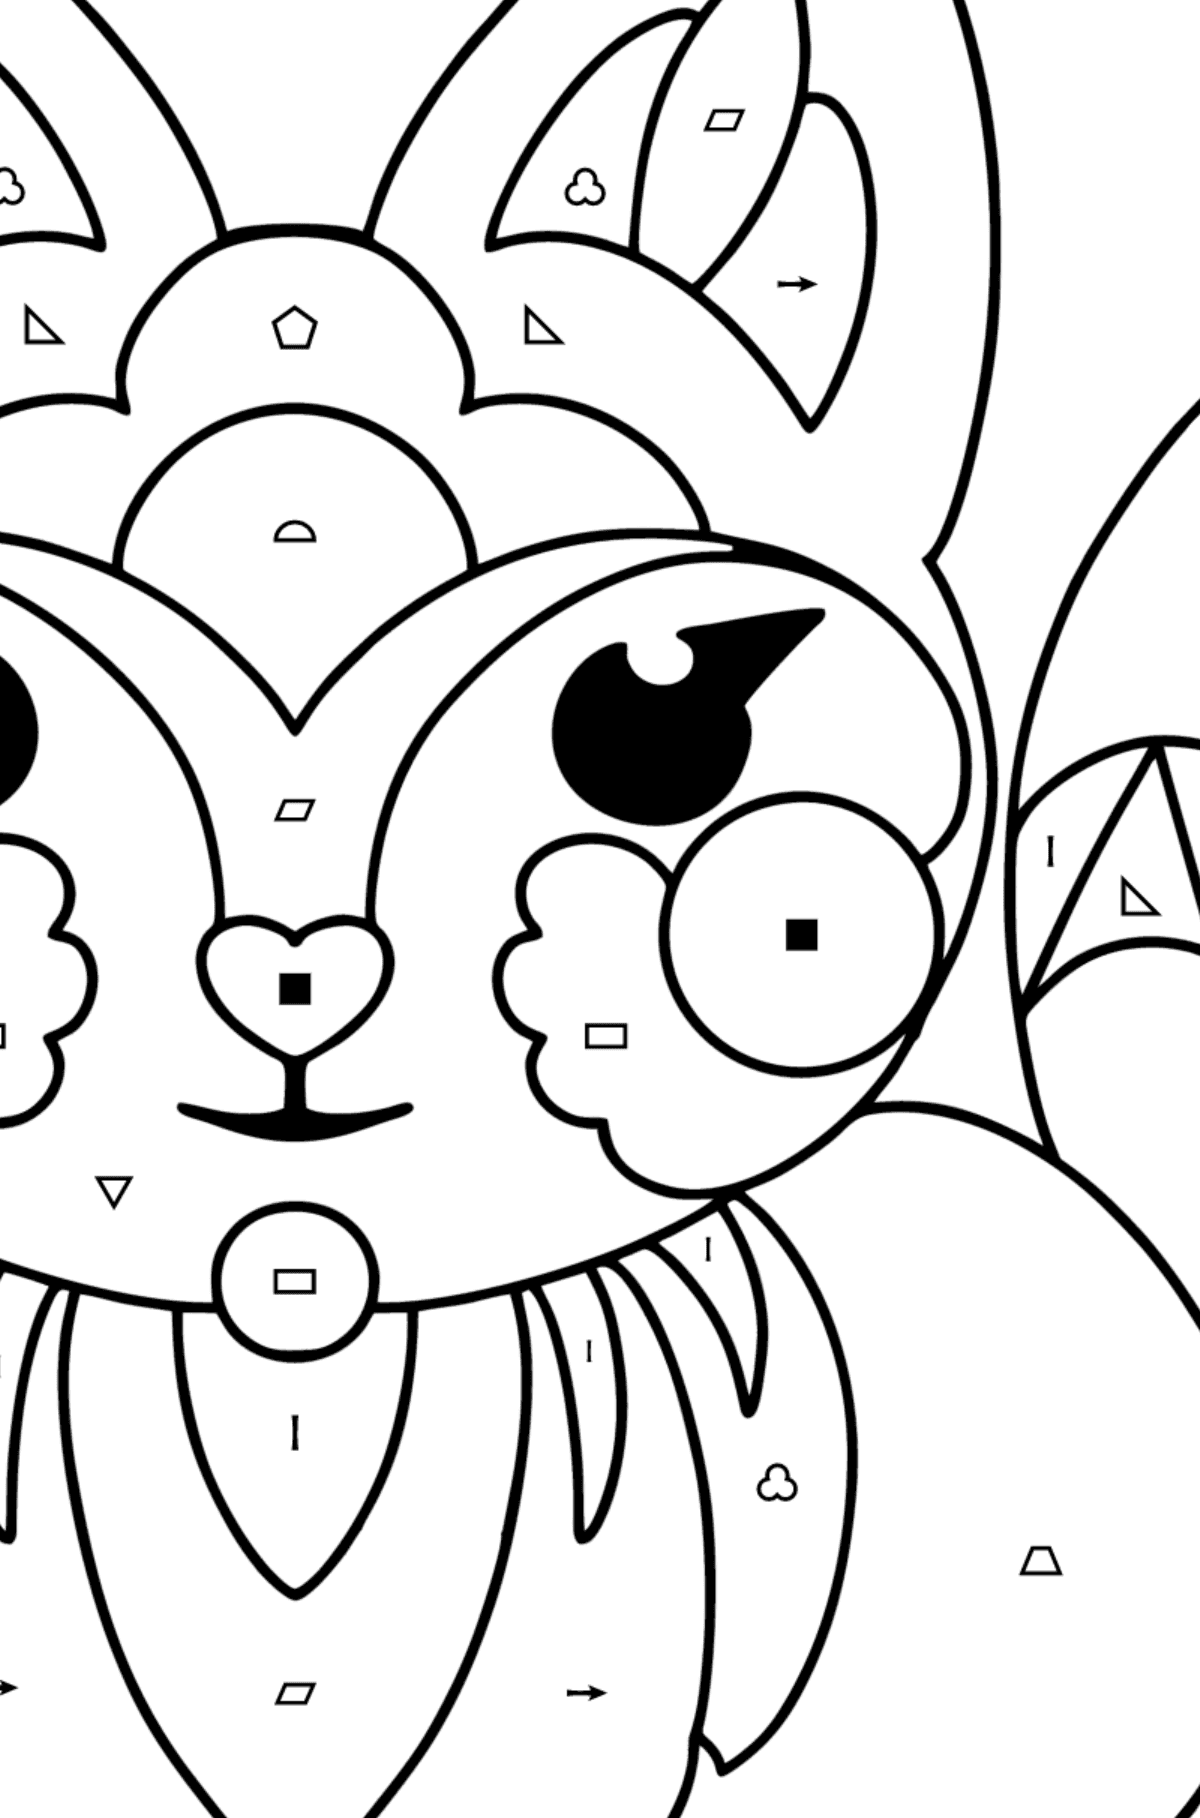 Anti stress Fox coloring page - Coloring by Symbols and Geometric Shapes for Kids